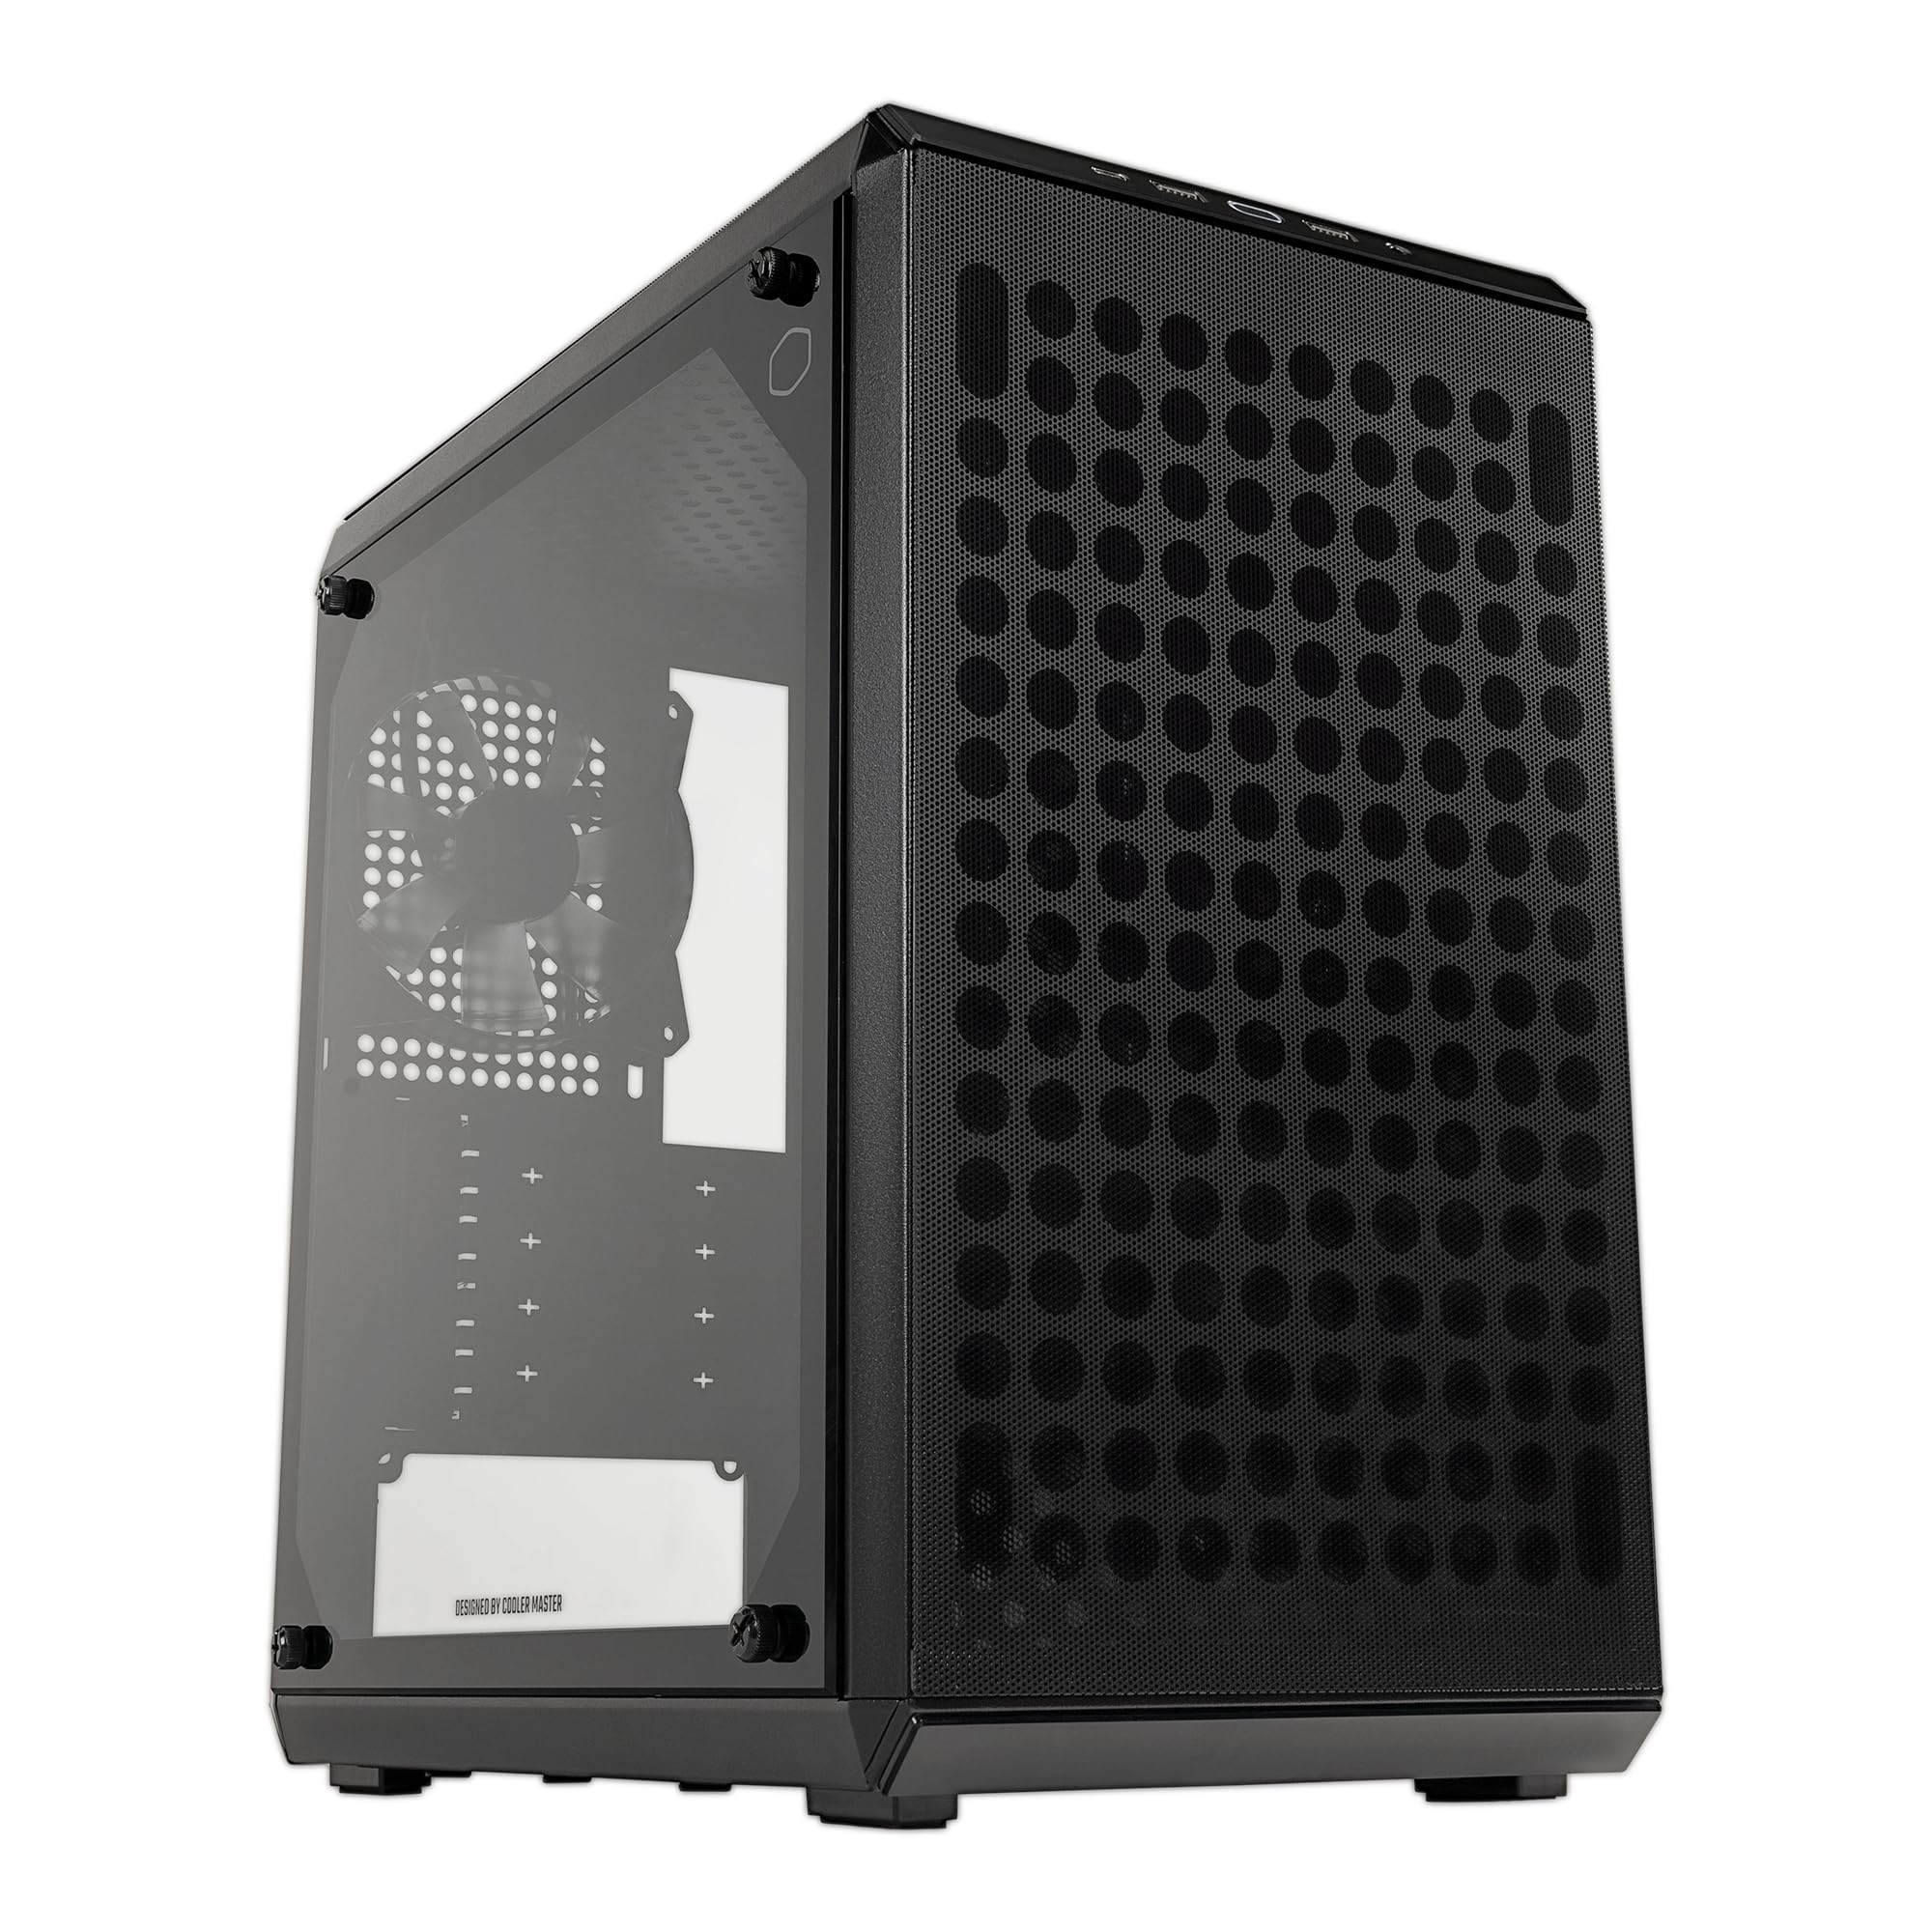 Cooler Master Q300L V2 microATX Computer Case w/ Tempered Glass Panel (Black) $45 + Free Shipping